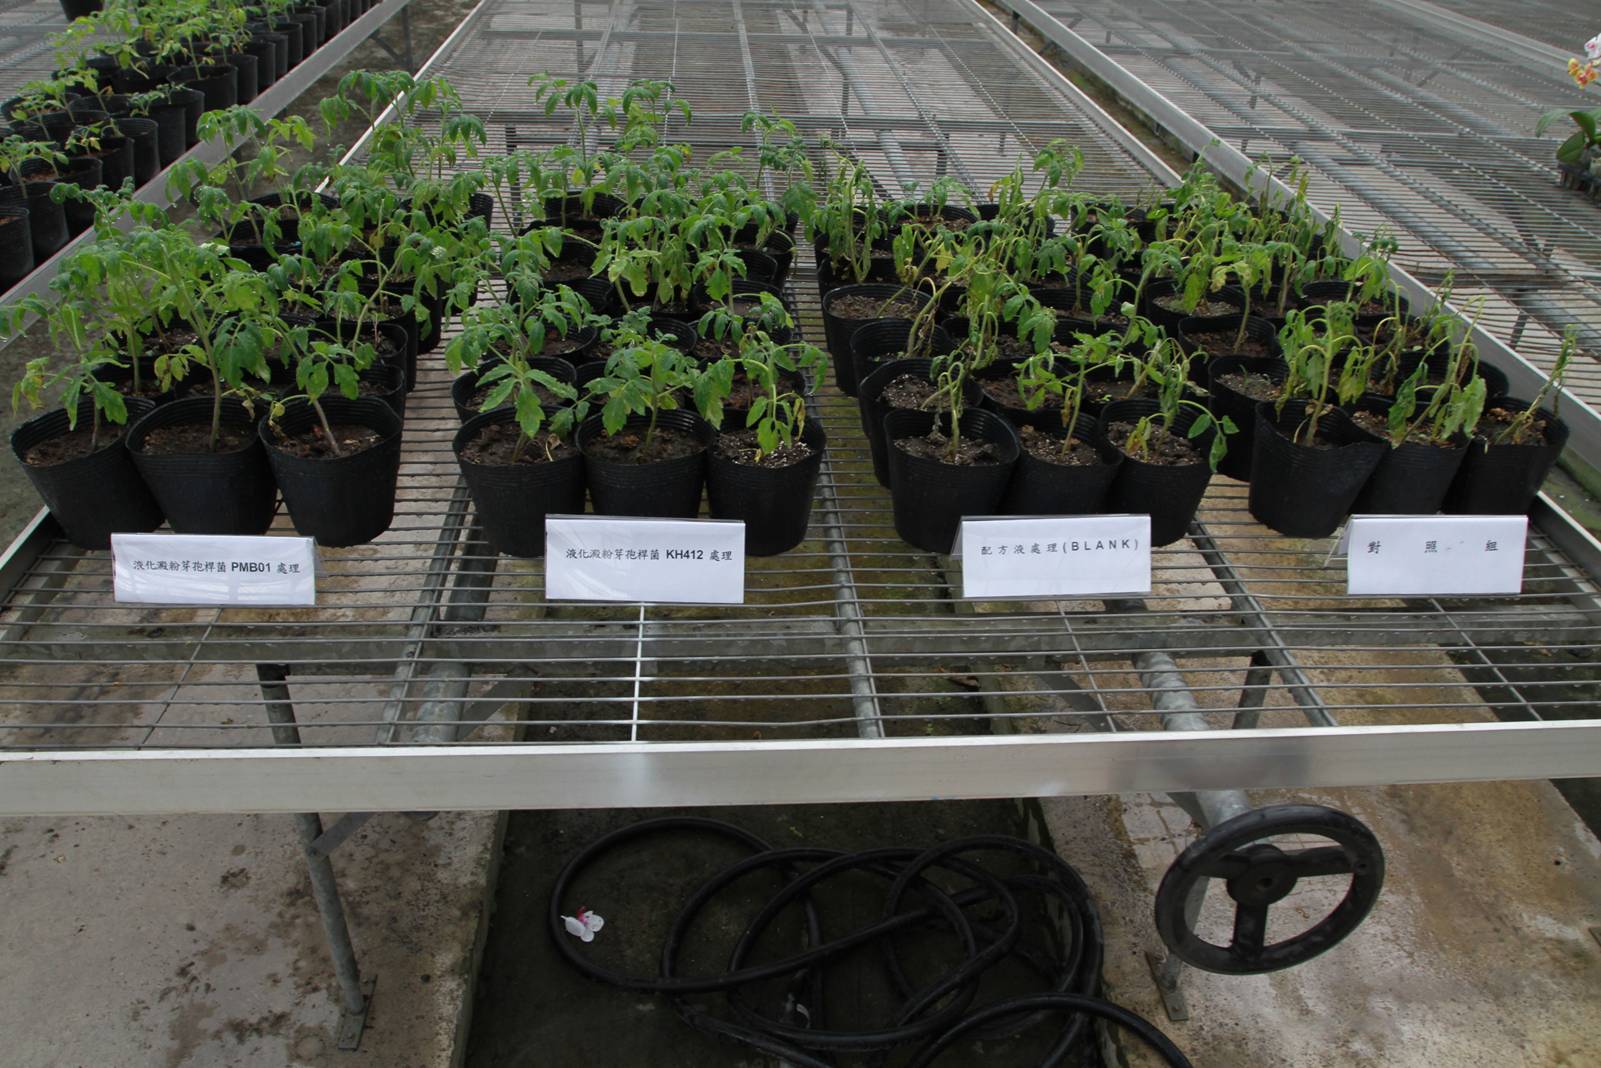 The efficacy of Bacillus amyloliquefaciens for the control of bacterial wilt of tomato in the greenhouse. (left 1-2: treatment of B. amyloliquefaciens; right 1: control; right 2: blank)